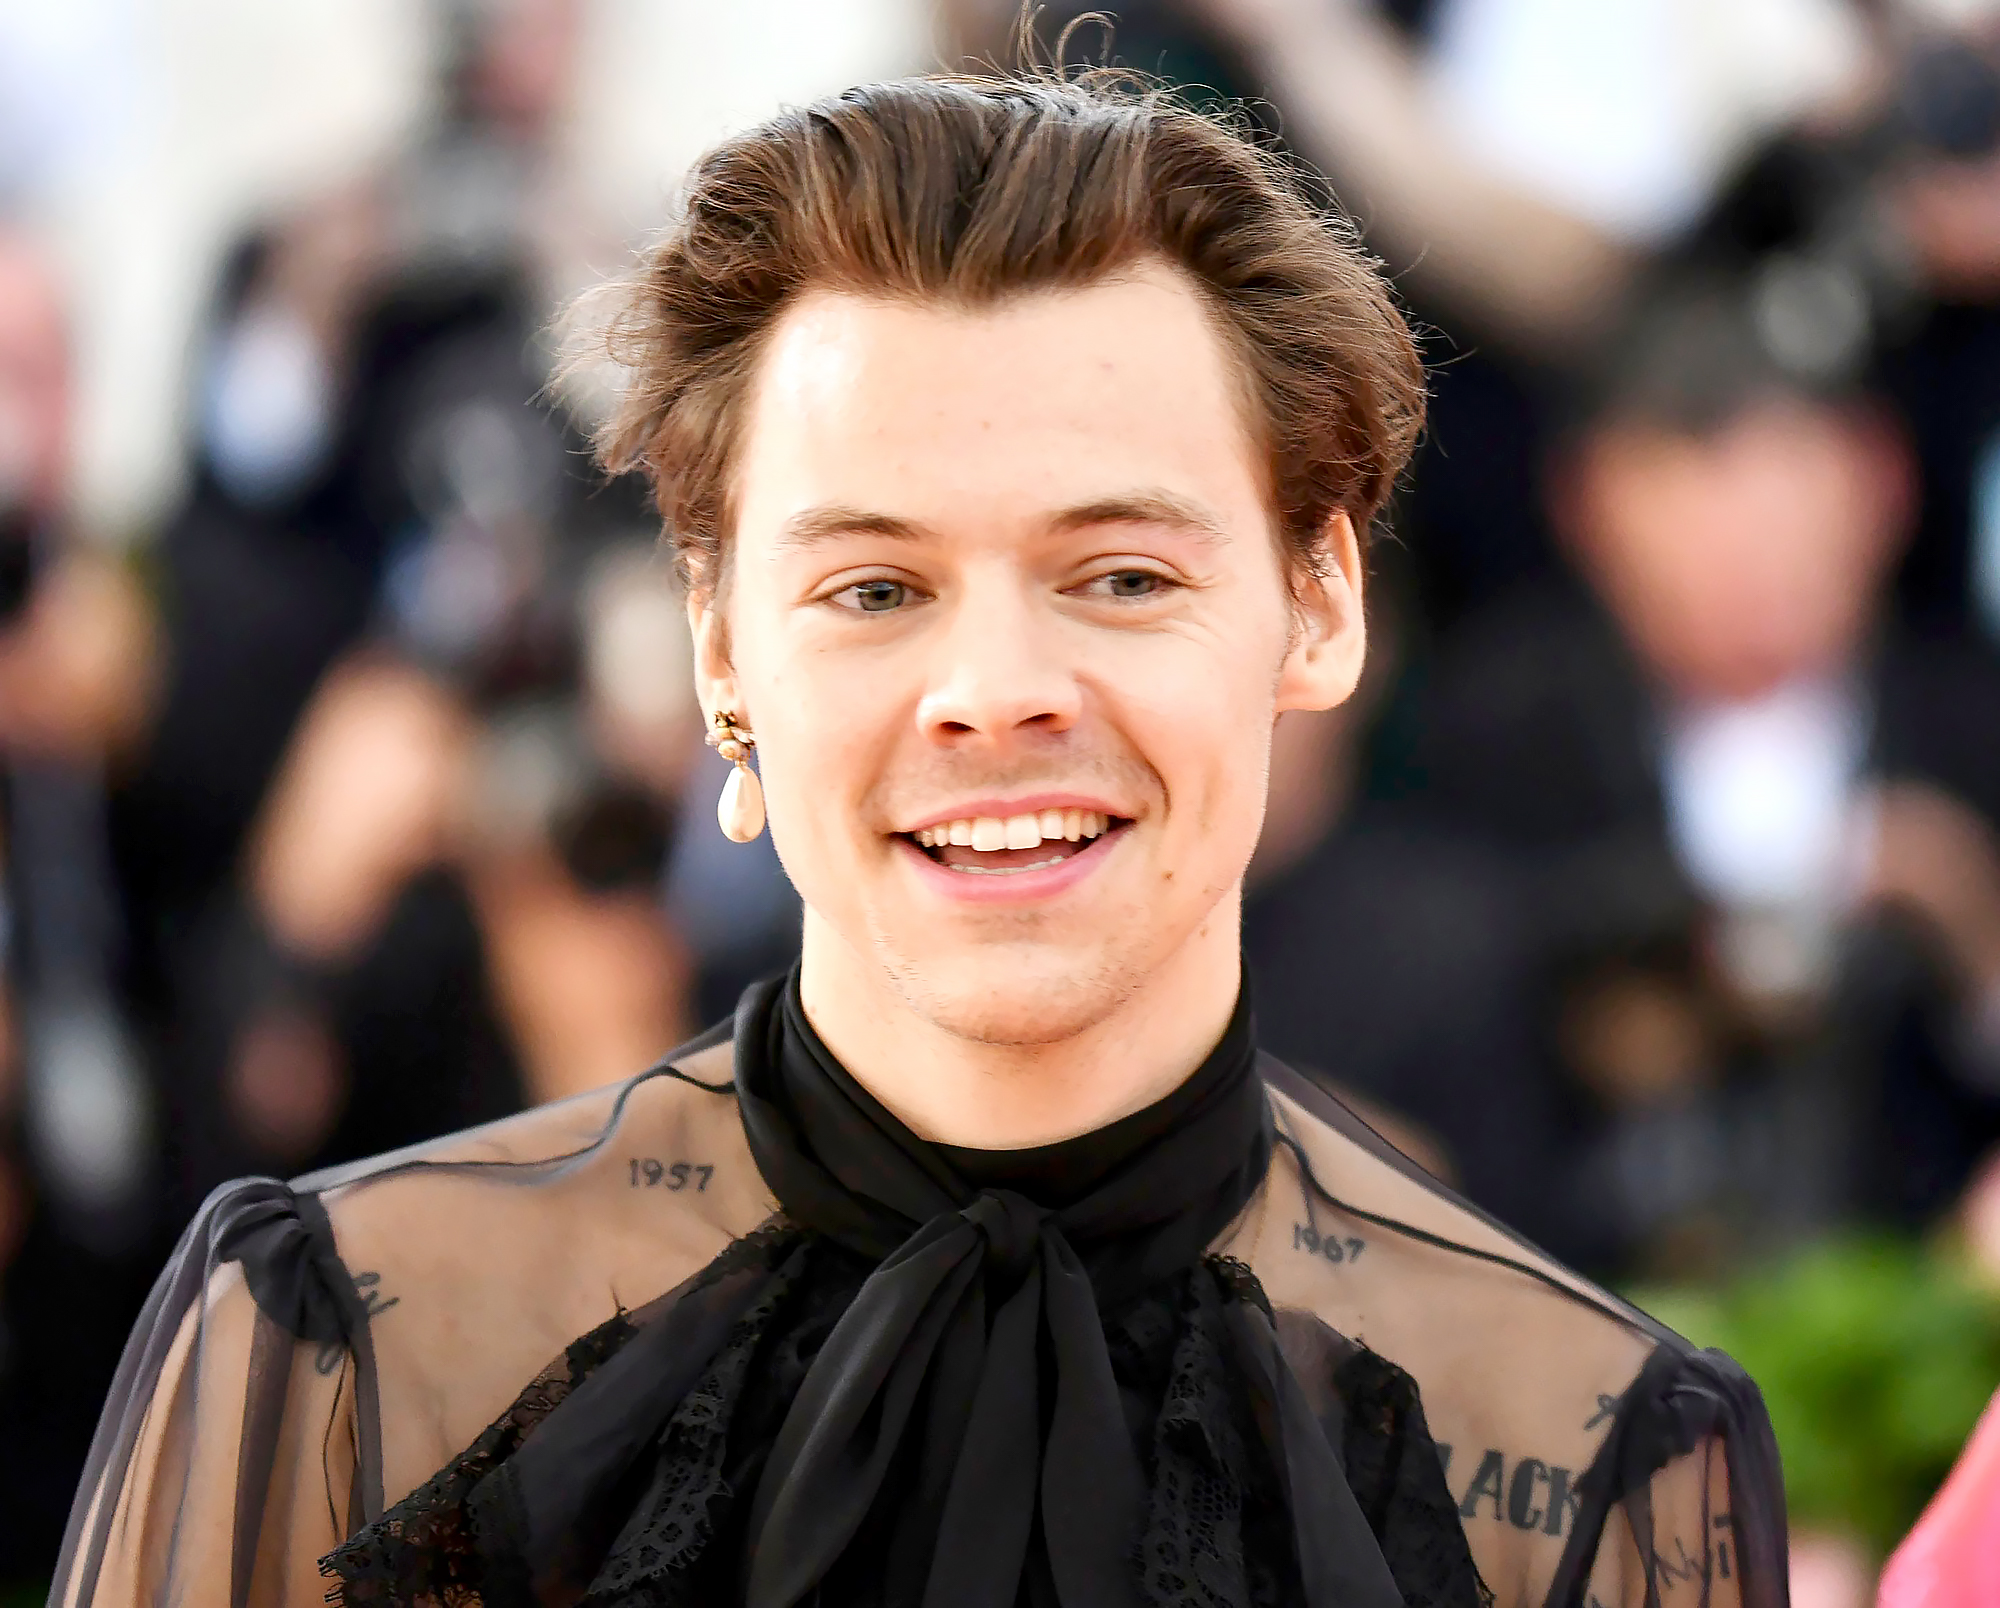 Harry Styles Shirtless on ‘Rolling Stone,’ to Release New Music